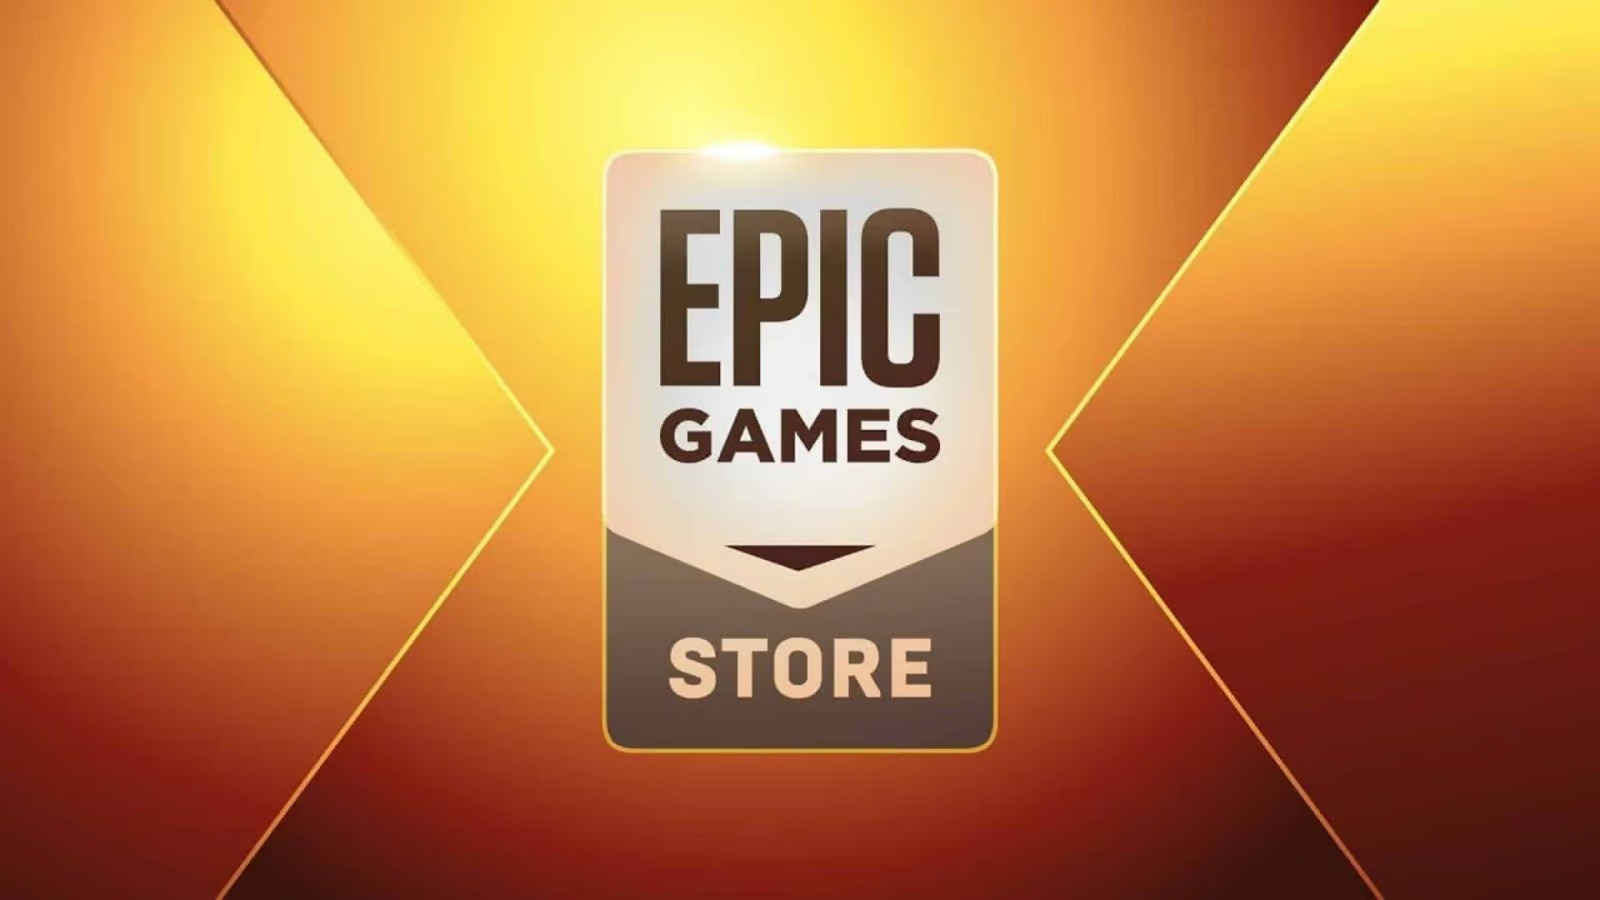 Epic games to surprise its gamers with a free game, coming soon!